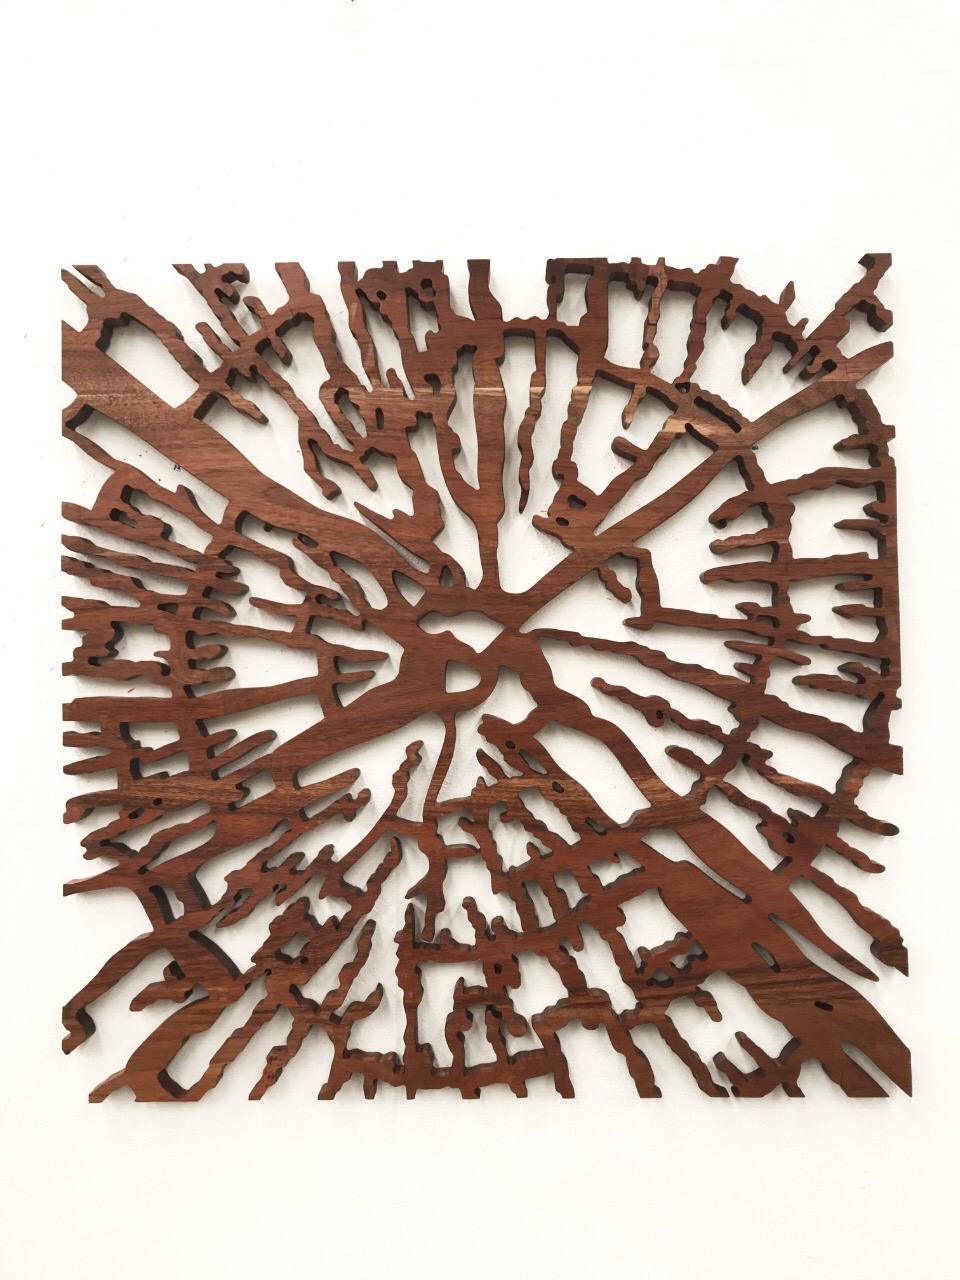 Dendrocronology, Beautiful Sculpture like wooden piece, inspired by nature